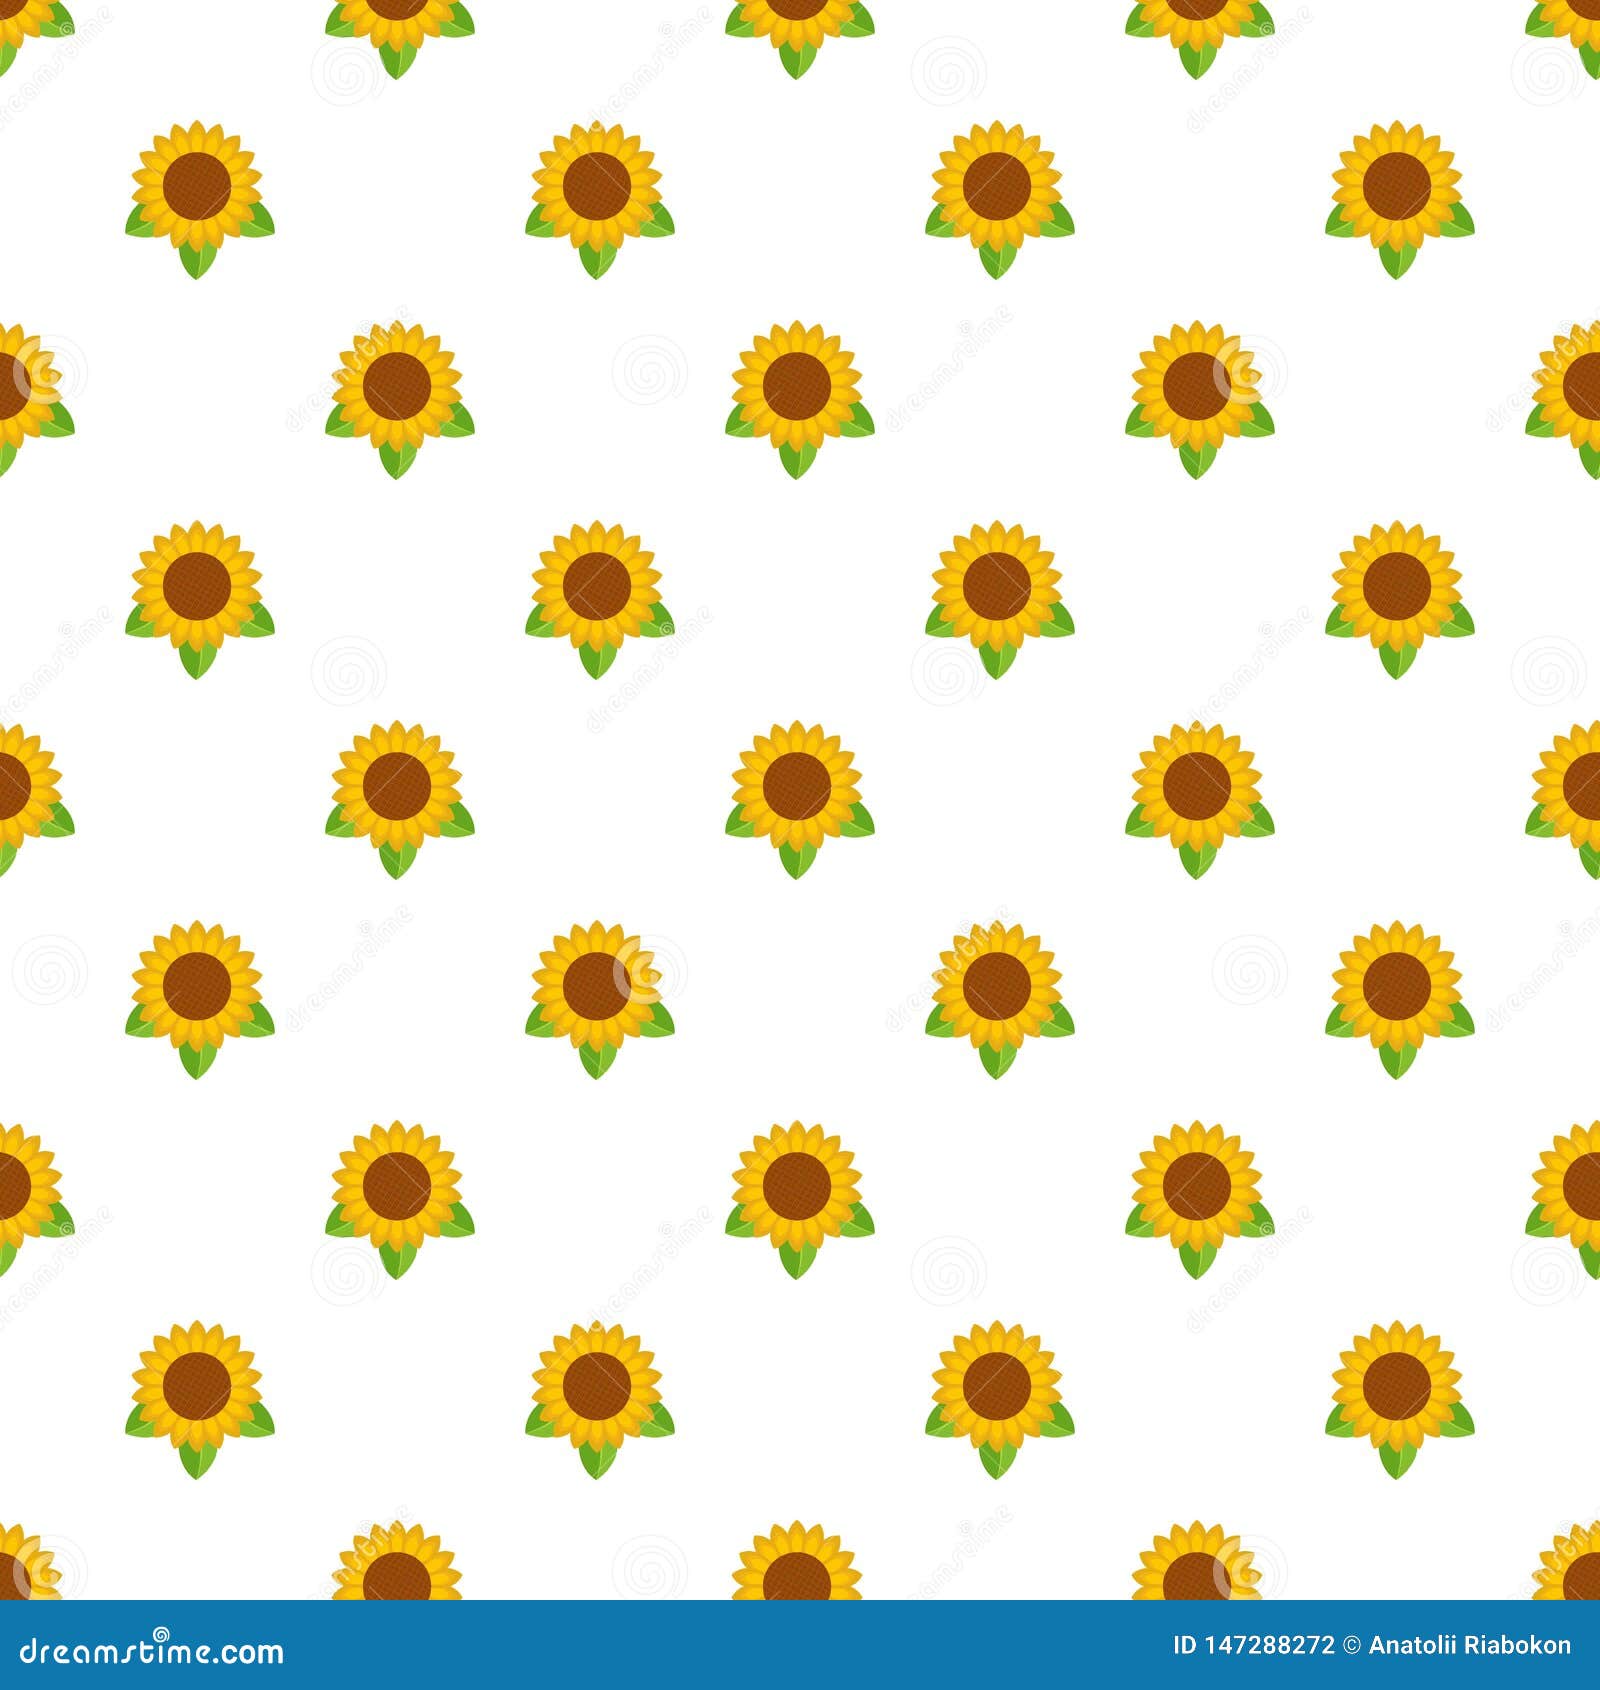 Download Sunflower Leaf Pattern Seamless Vector Stock Vector ...